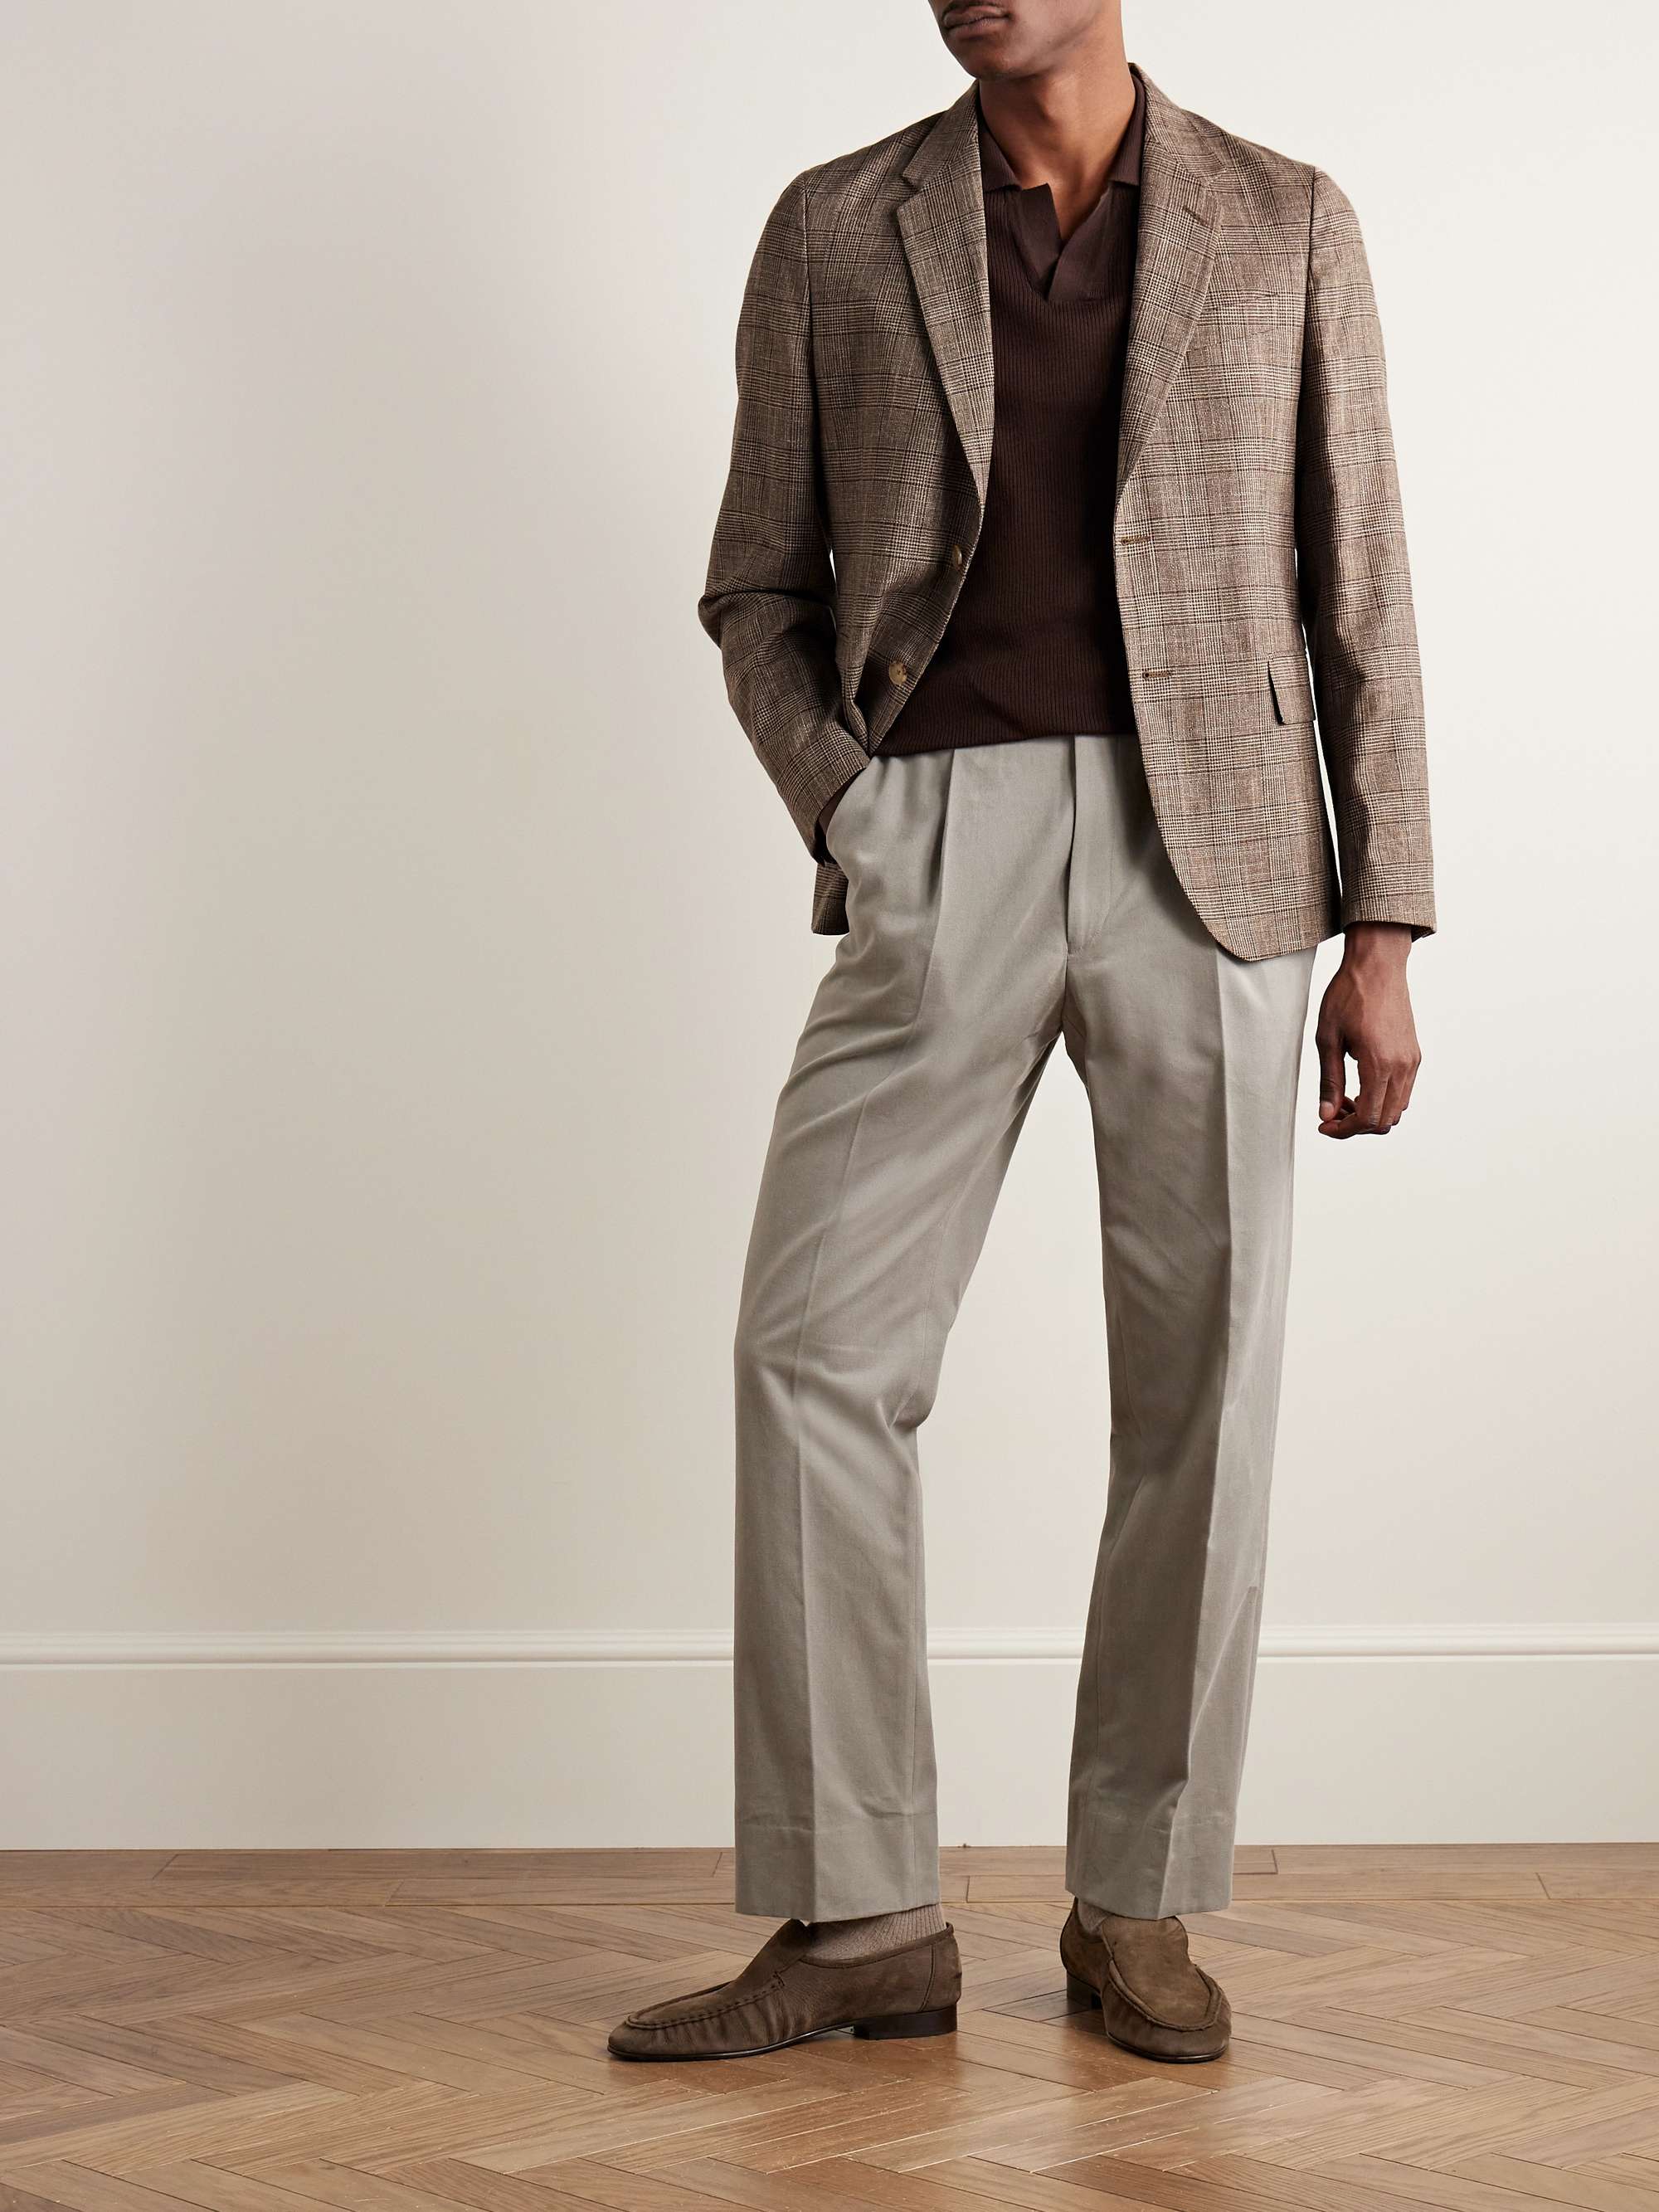 Paul Smith Linen Trousers at CareOfCarl.com